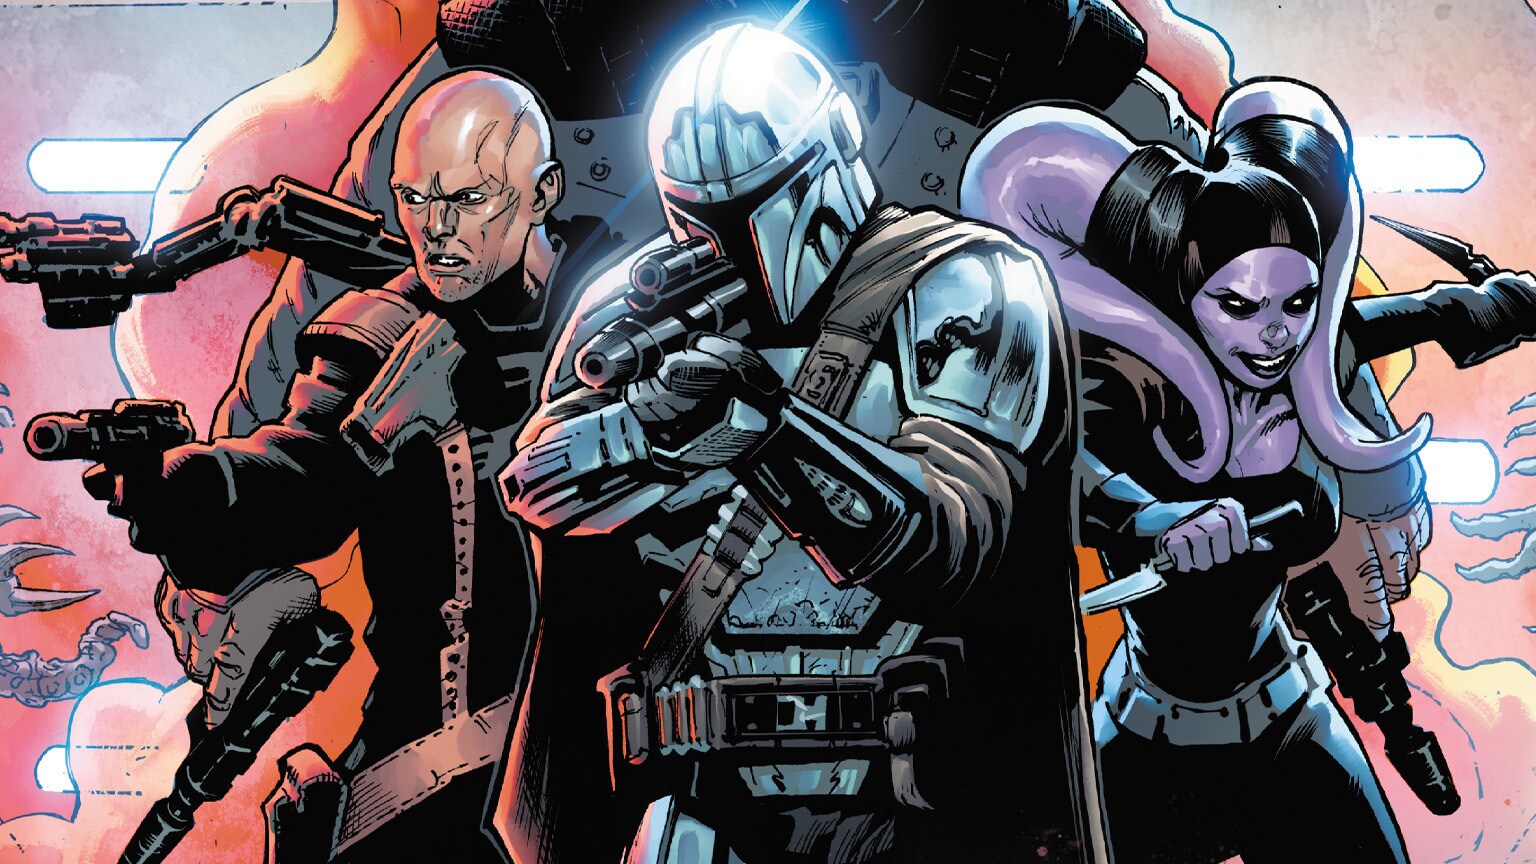 Migs Mayfeld Prepares for a Prison Sting in Marvel’s Star Wars: The Mandalorian #6 - Exclusive Preview